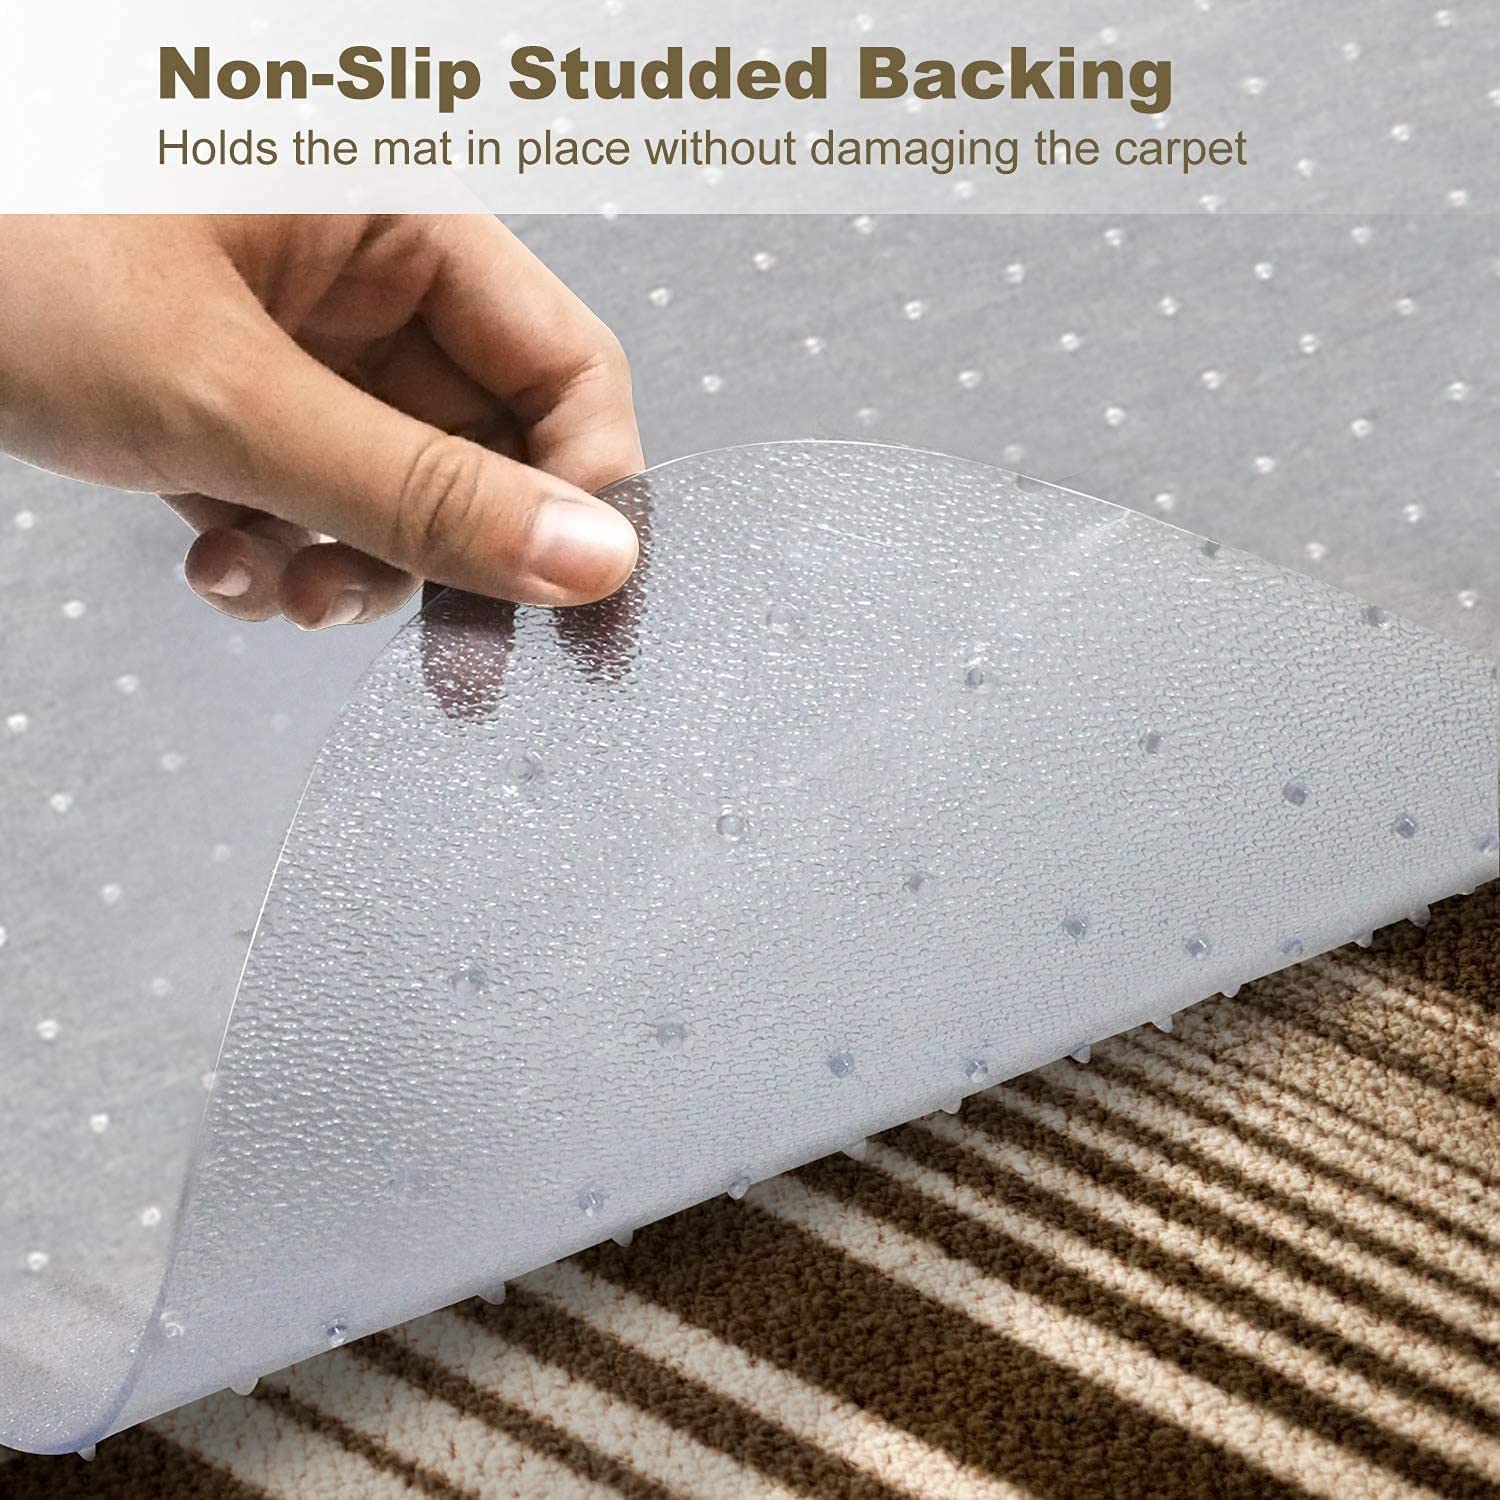 FZYUAN Office Chair Mat for Carpets, Transparent 2mm Thick and Sturdy Highly Premium Quality Floor Mats with Studs, Home Office Chair Mat for Low, Standard and Medium Pile Carpeted Floors,29.5"×47.2"